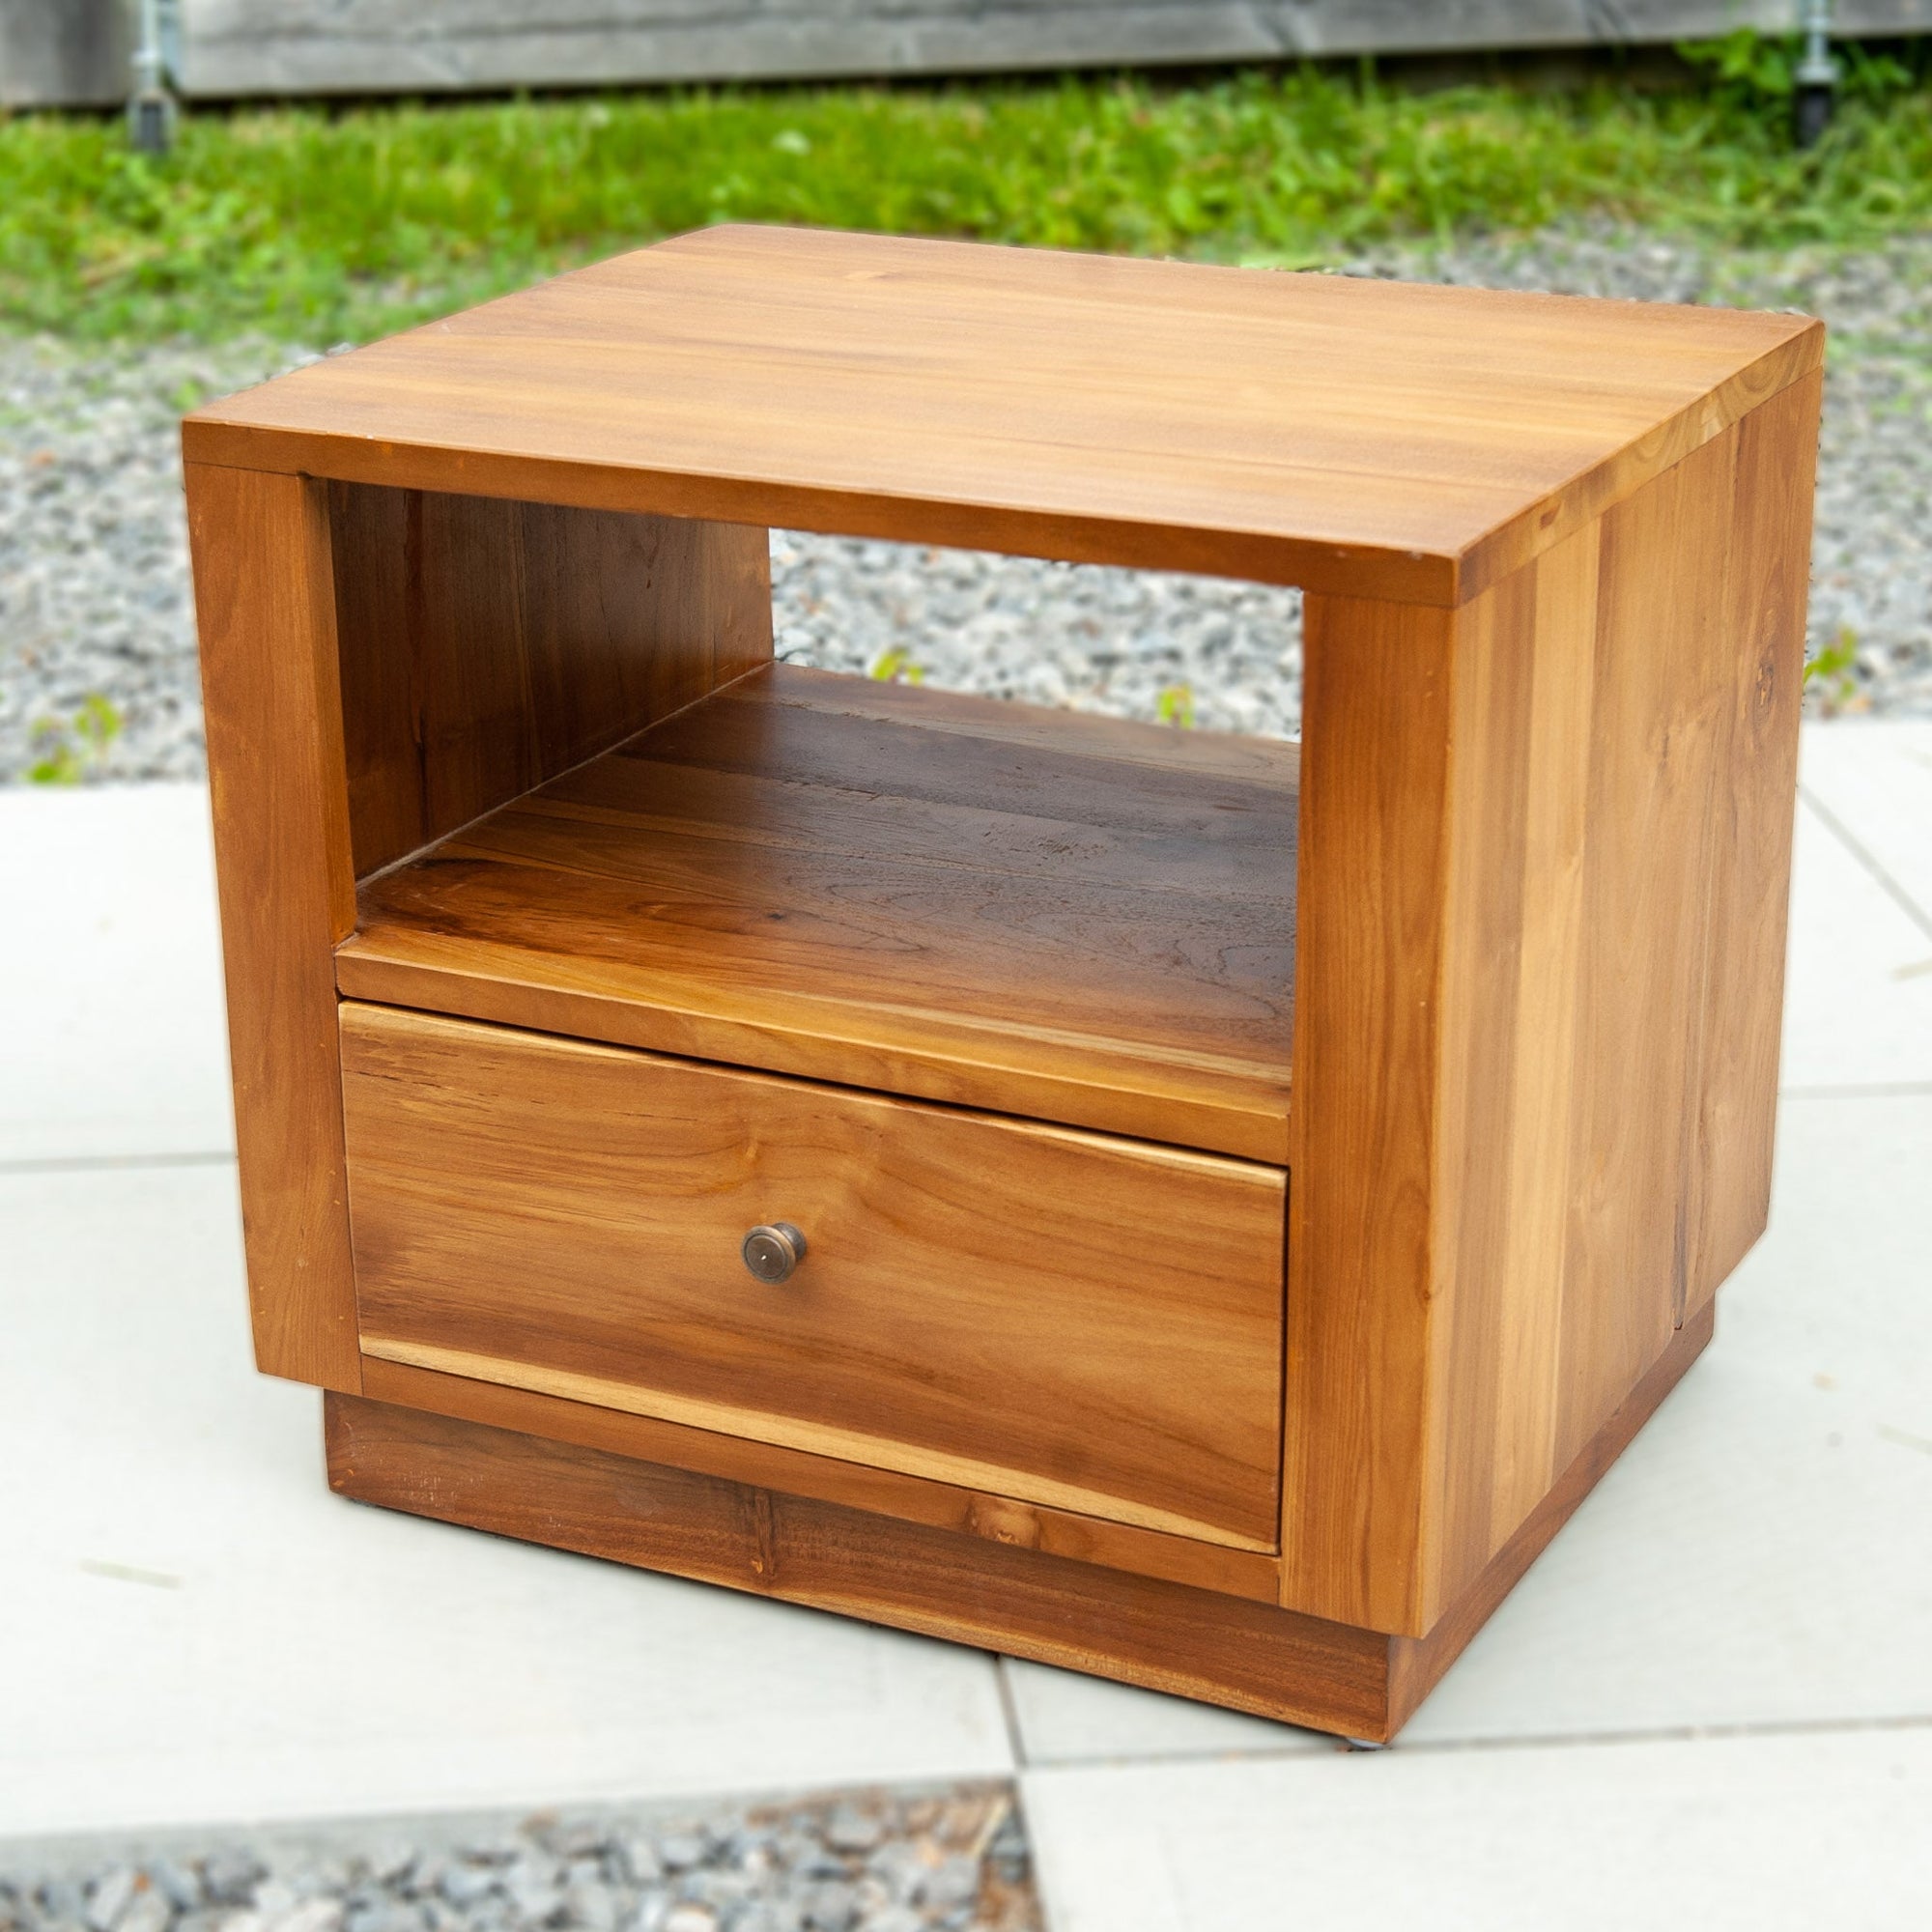 An image of a Java Teak Bedside Table. This beautifully crafted bedside table showcases the elegance and natural charm of Java teak wood. The table features a compact design, perfect for placing next to a bed. The rich, warm tones of the teak wood create a cozy and inviting atmosphere.